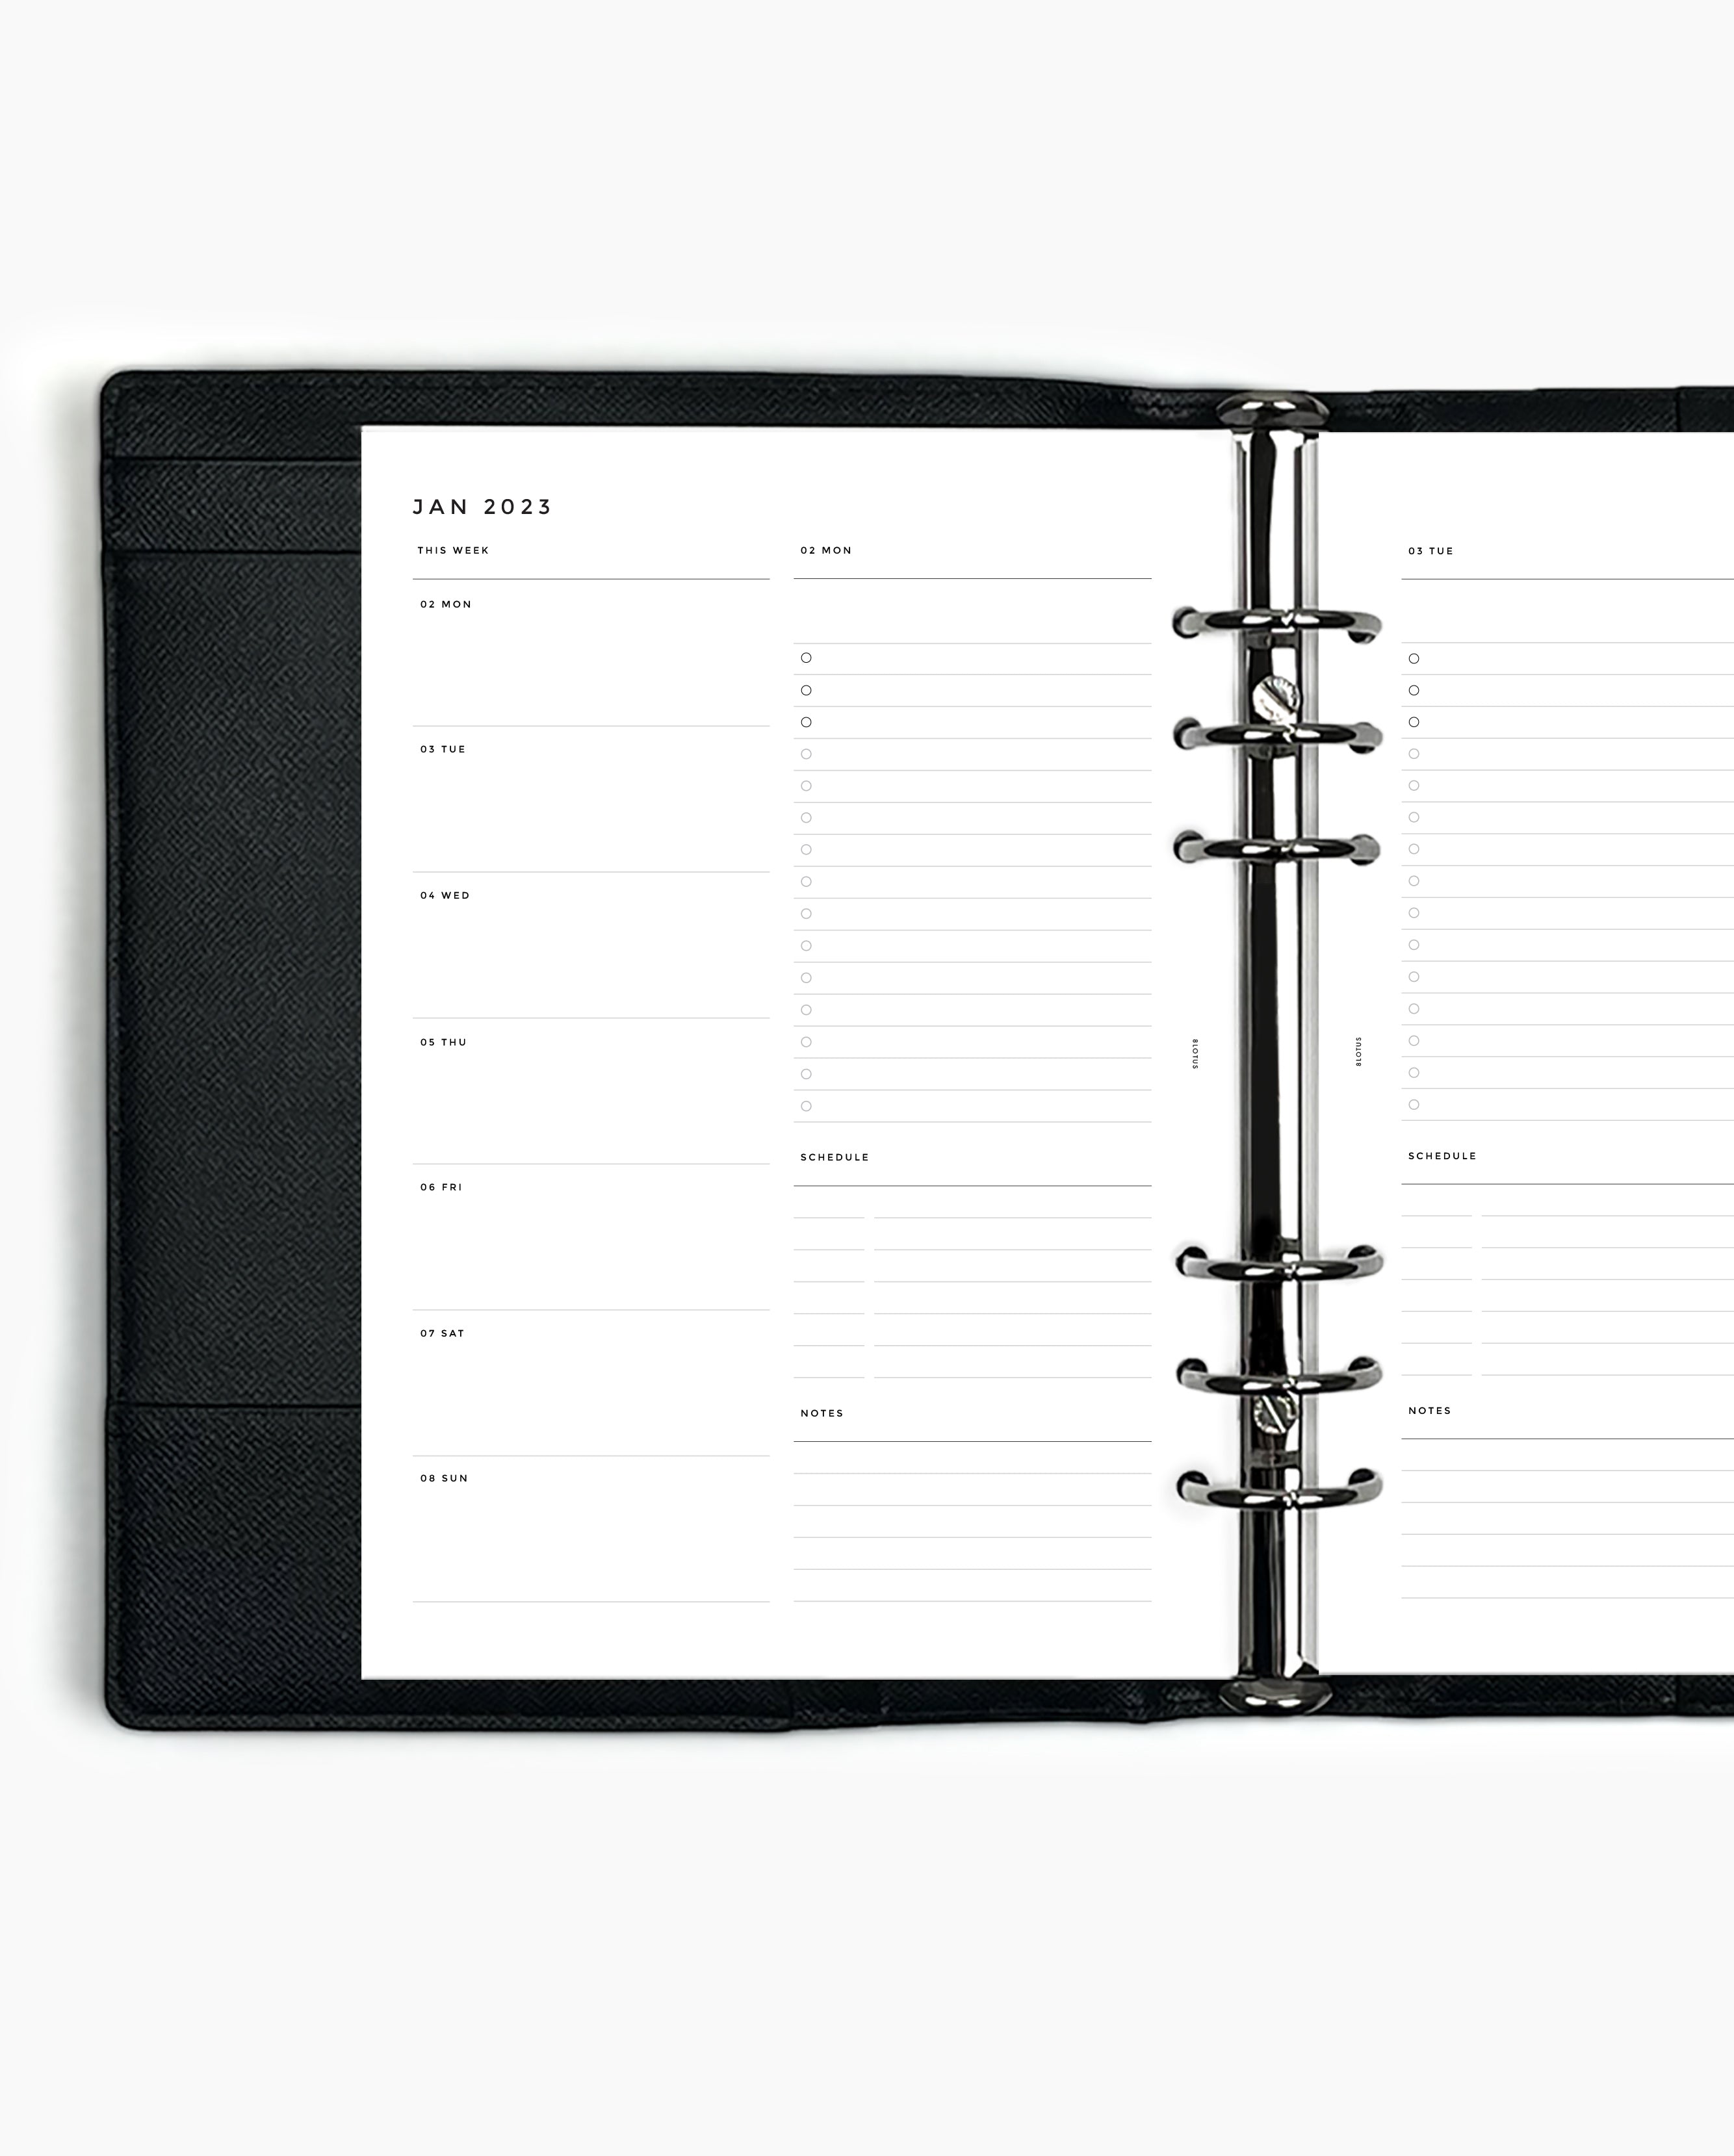 MN080A - 2023 Daily Planner - 2DO1P